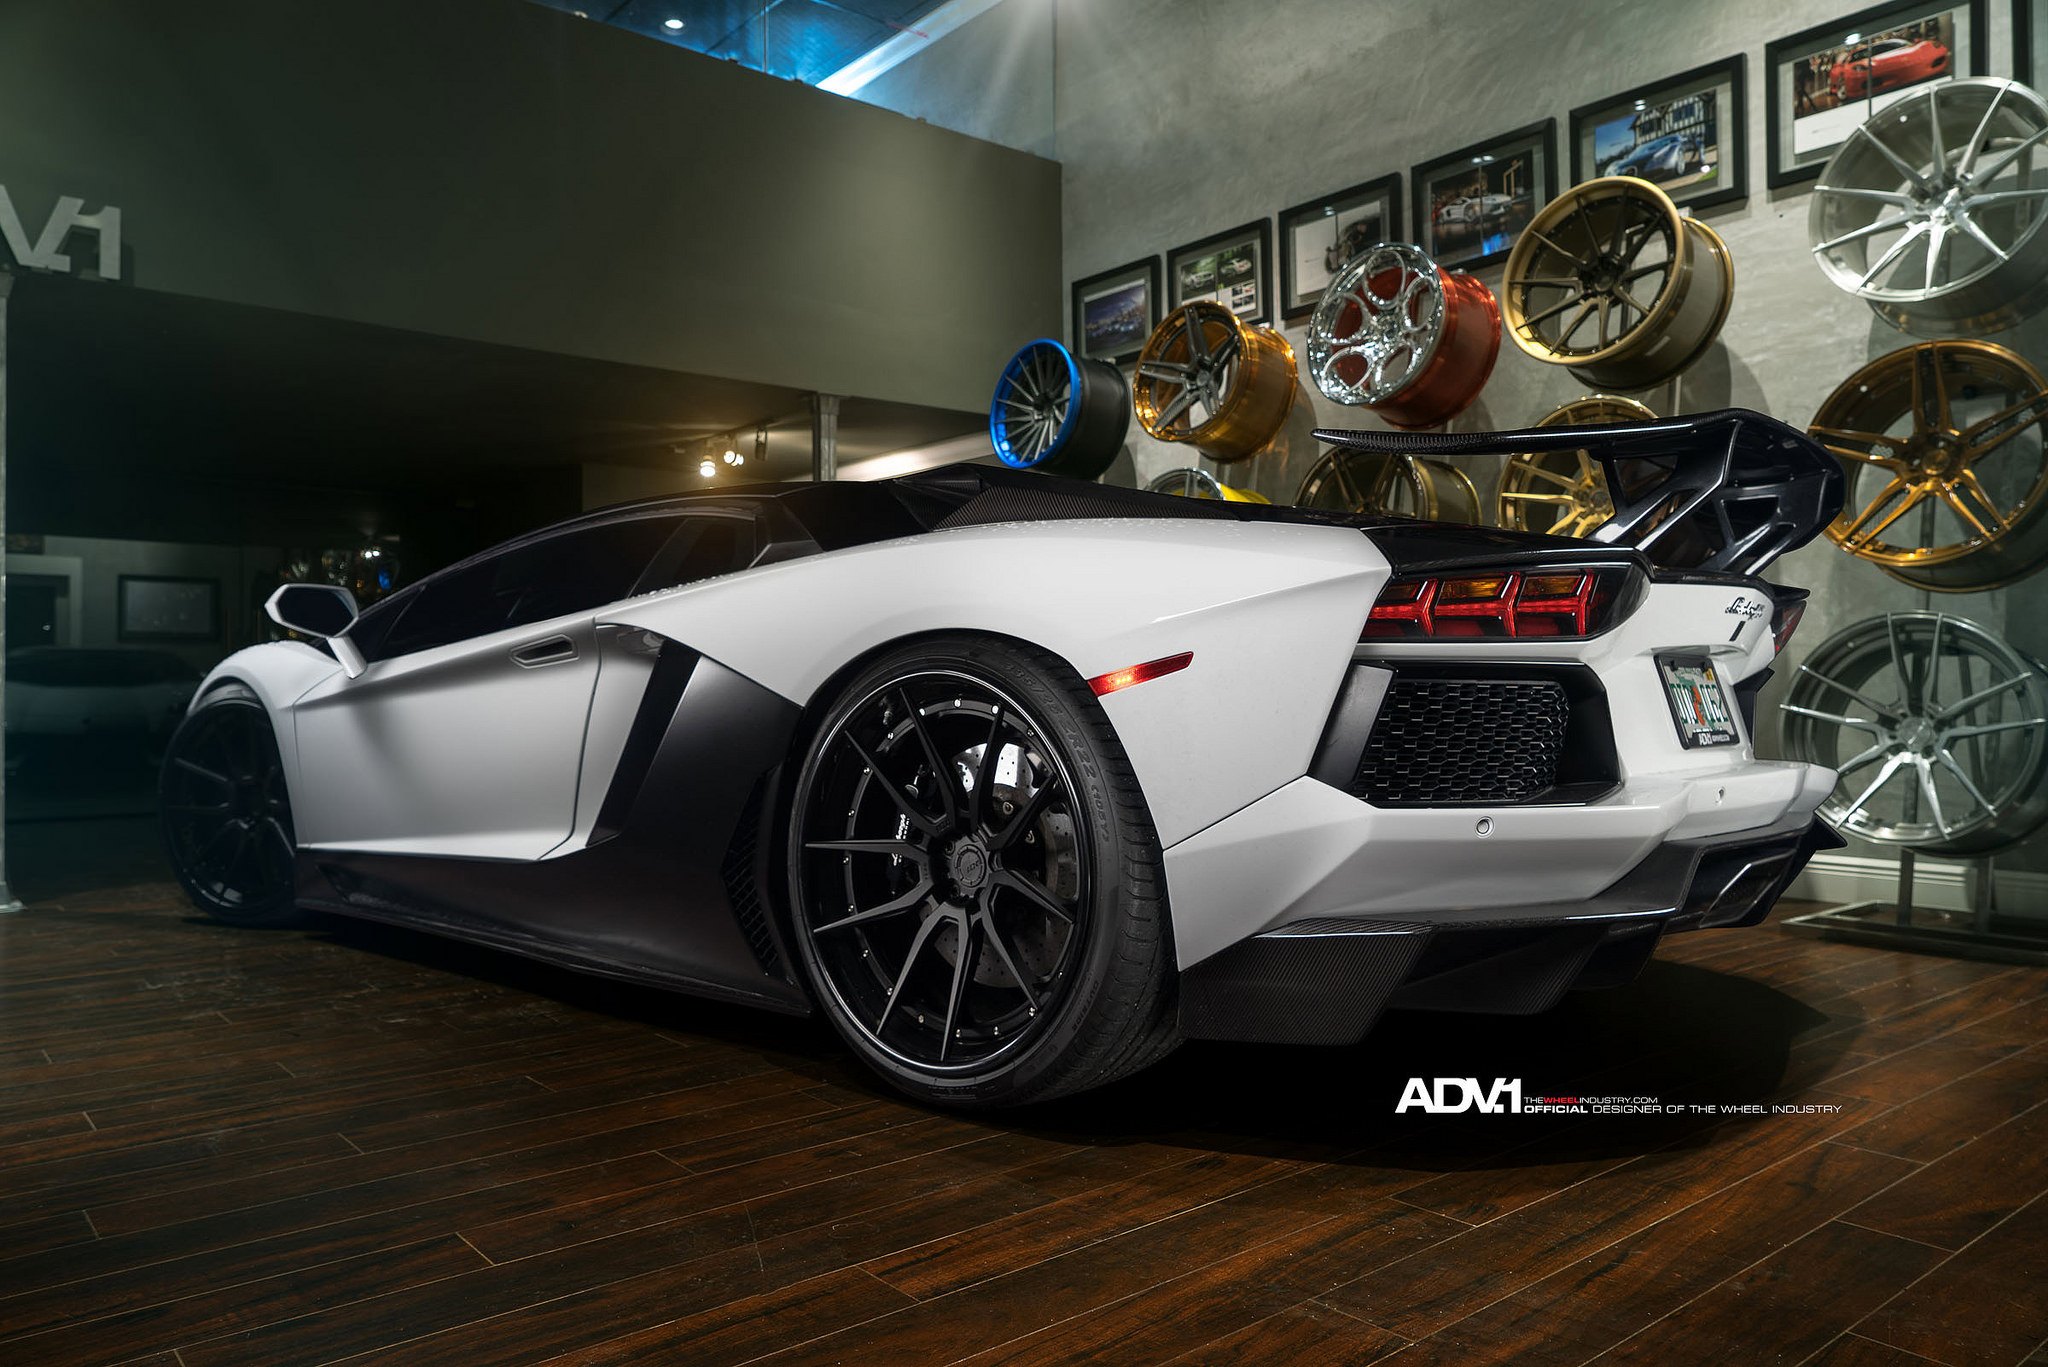 Lamborghini Aventador With Aftermarket Forged Rims - Photo by ADV.1